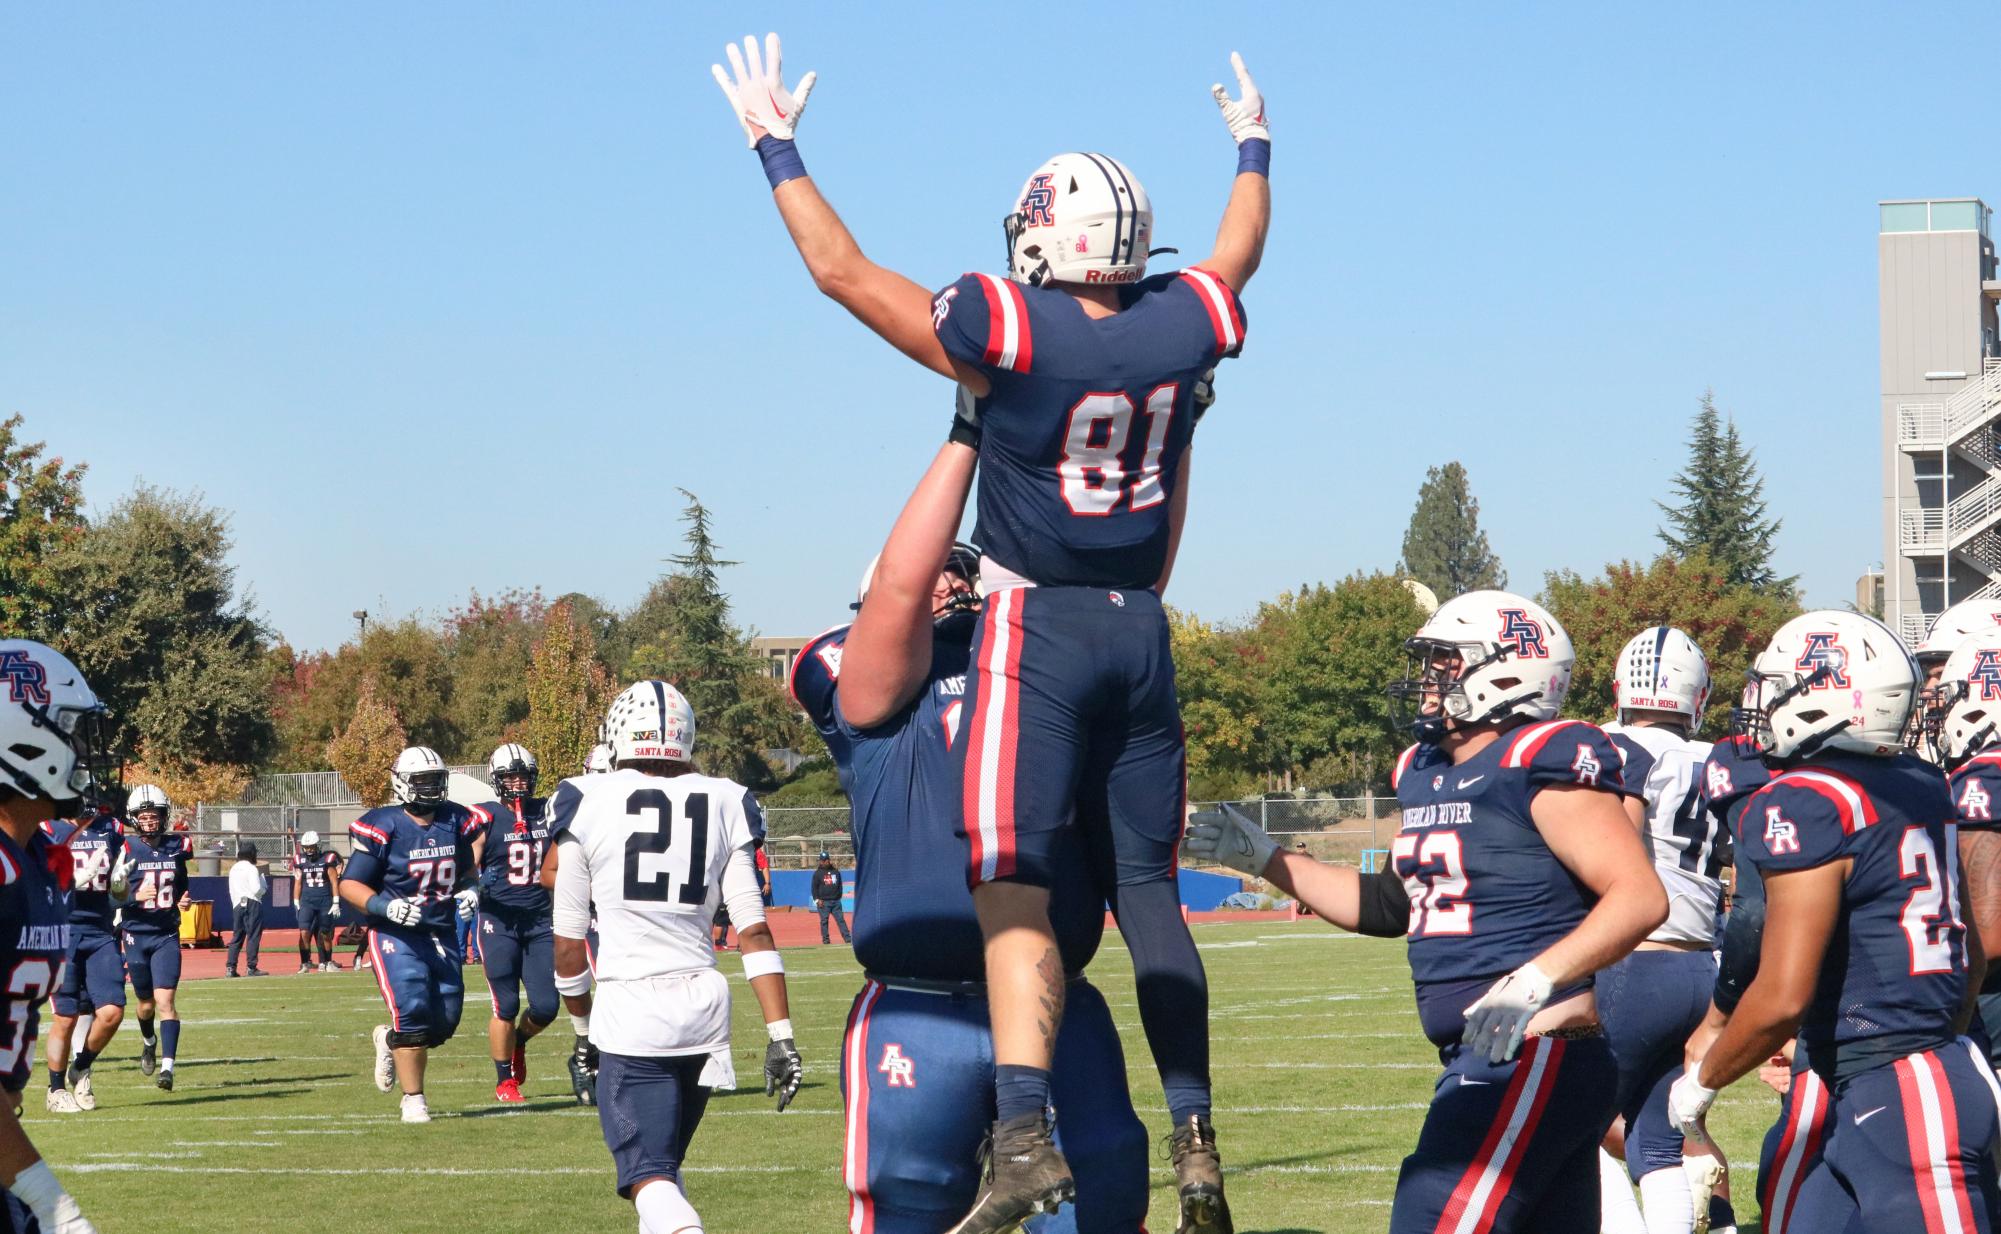 Tight end Seth Bozzi, among others, allowed American River to get in front quickly and never look back in their 54-16 home victory on Oct. 28. (Photo by Joseph Bianchini)